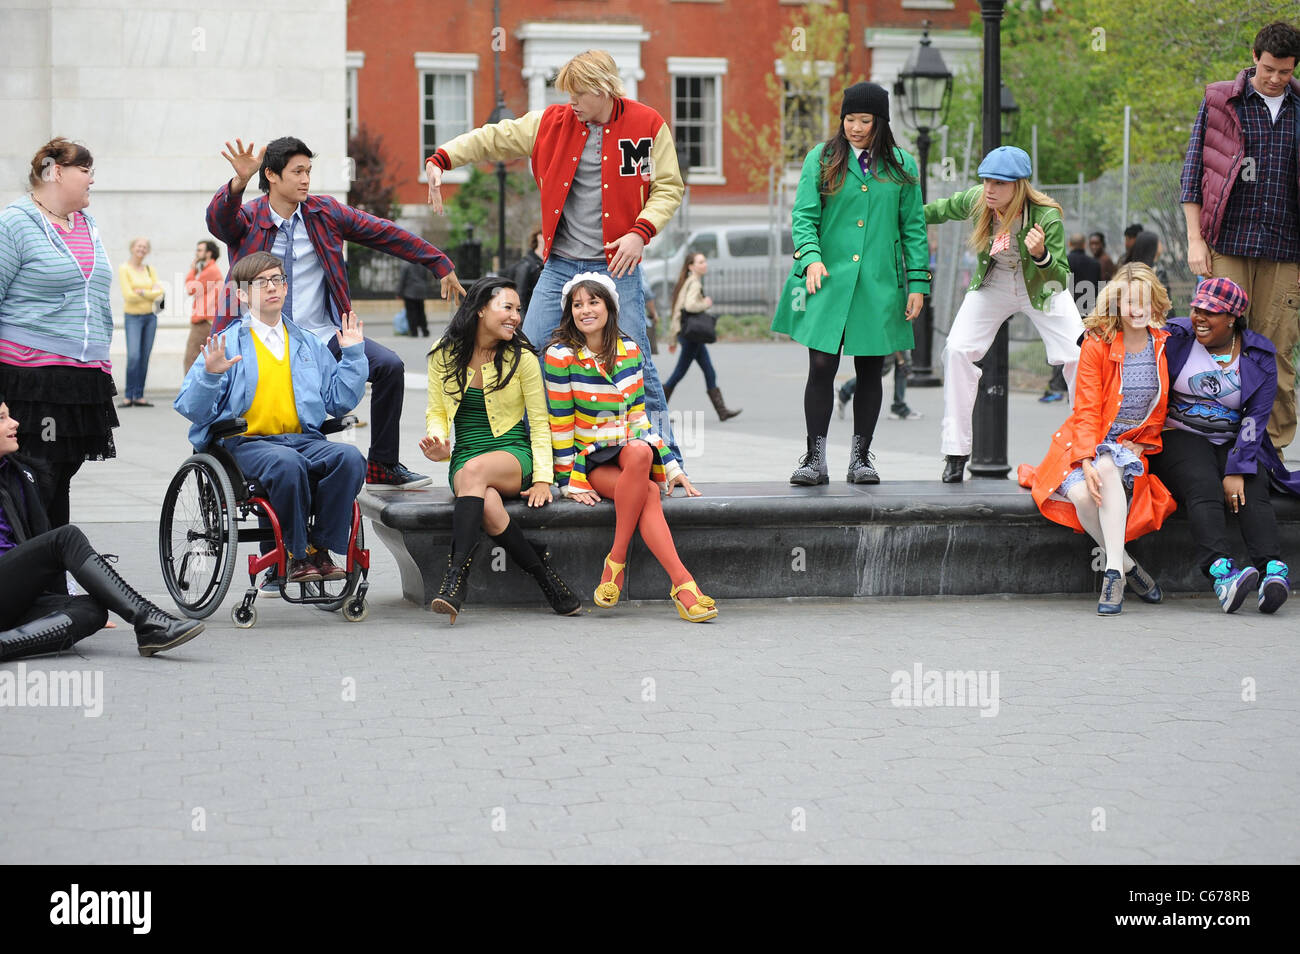 Cast Of Glee On Location For Glee Season 2 Filming On Location In Stock Photo Alamy